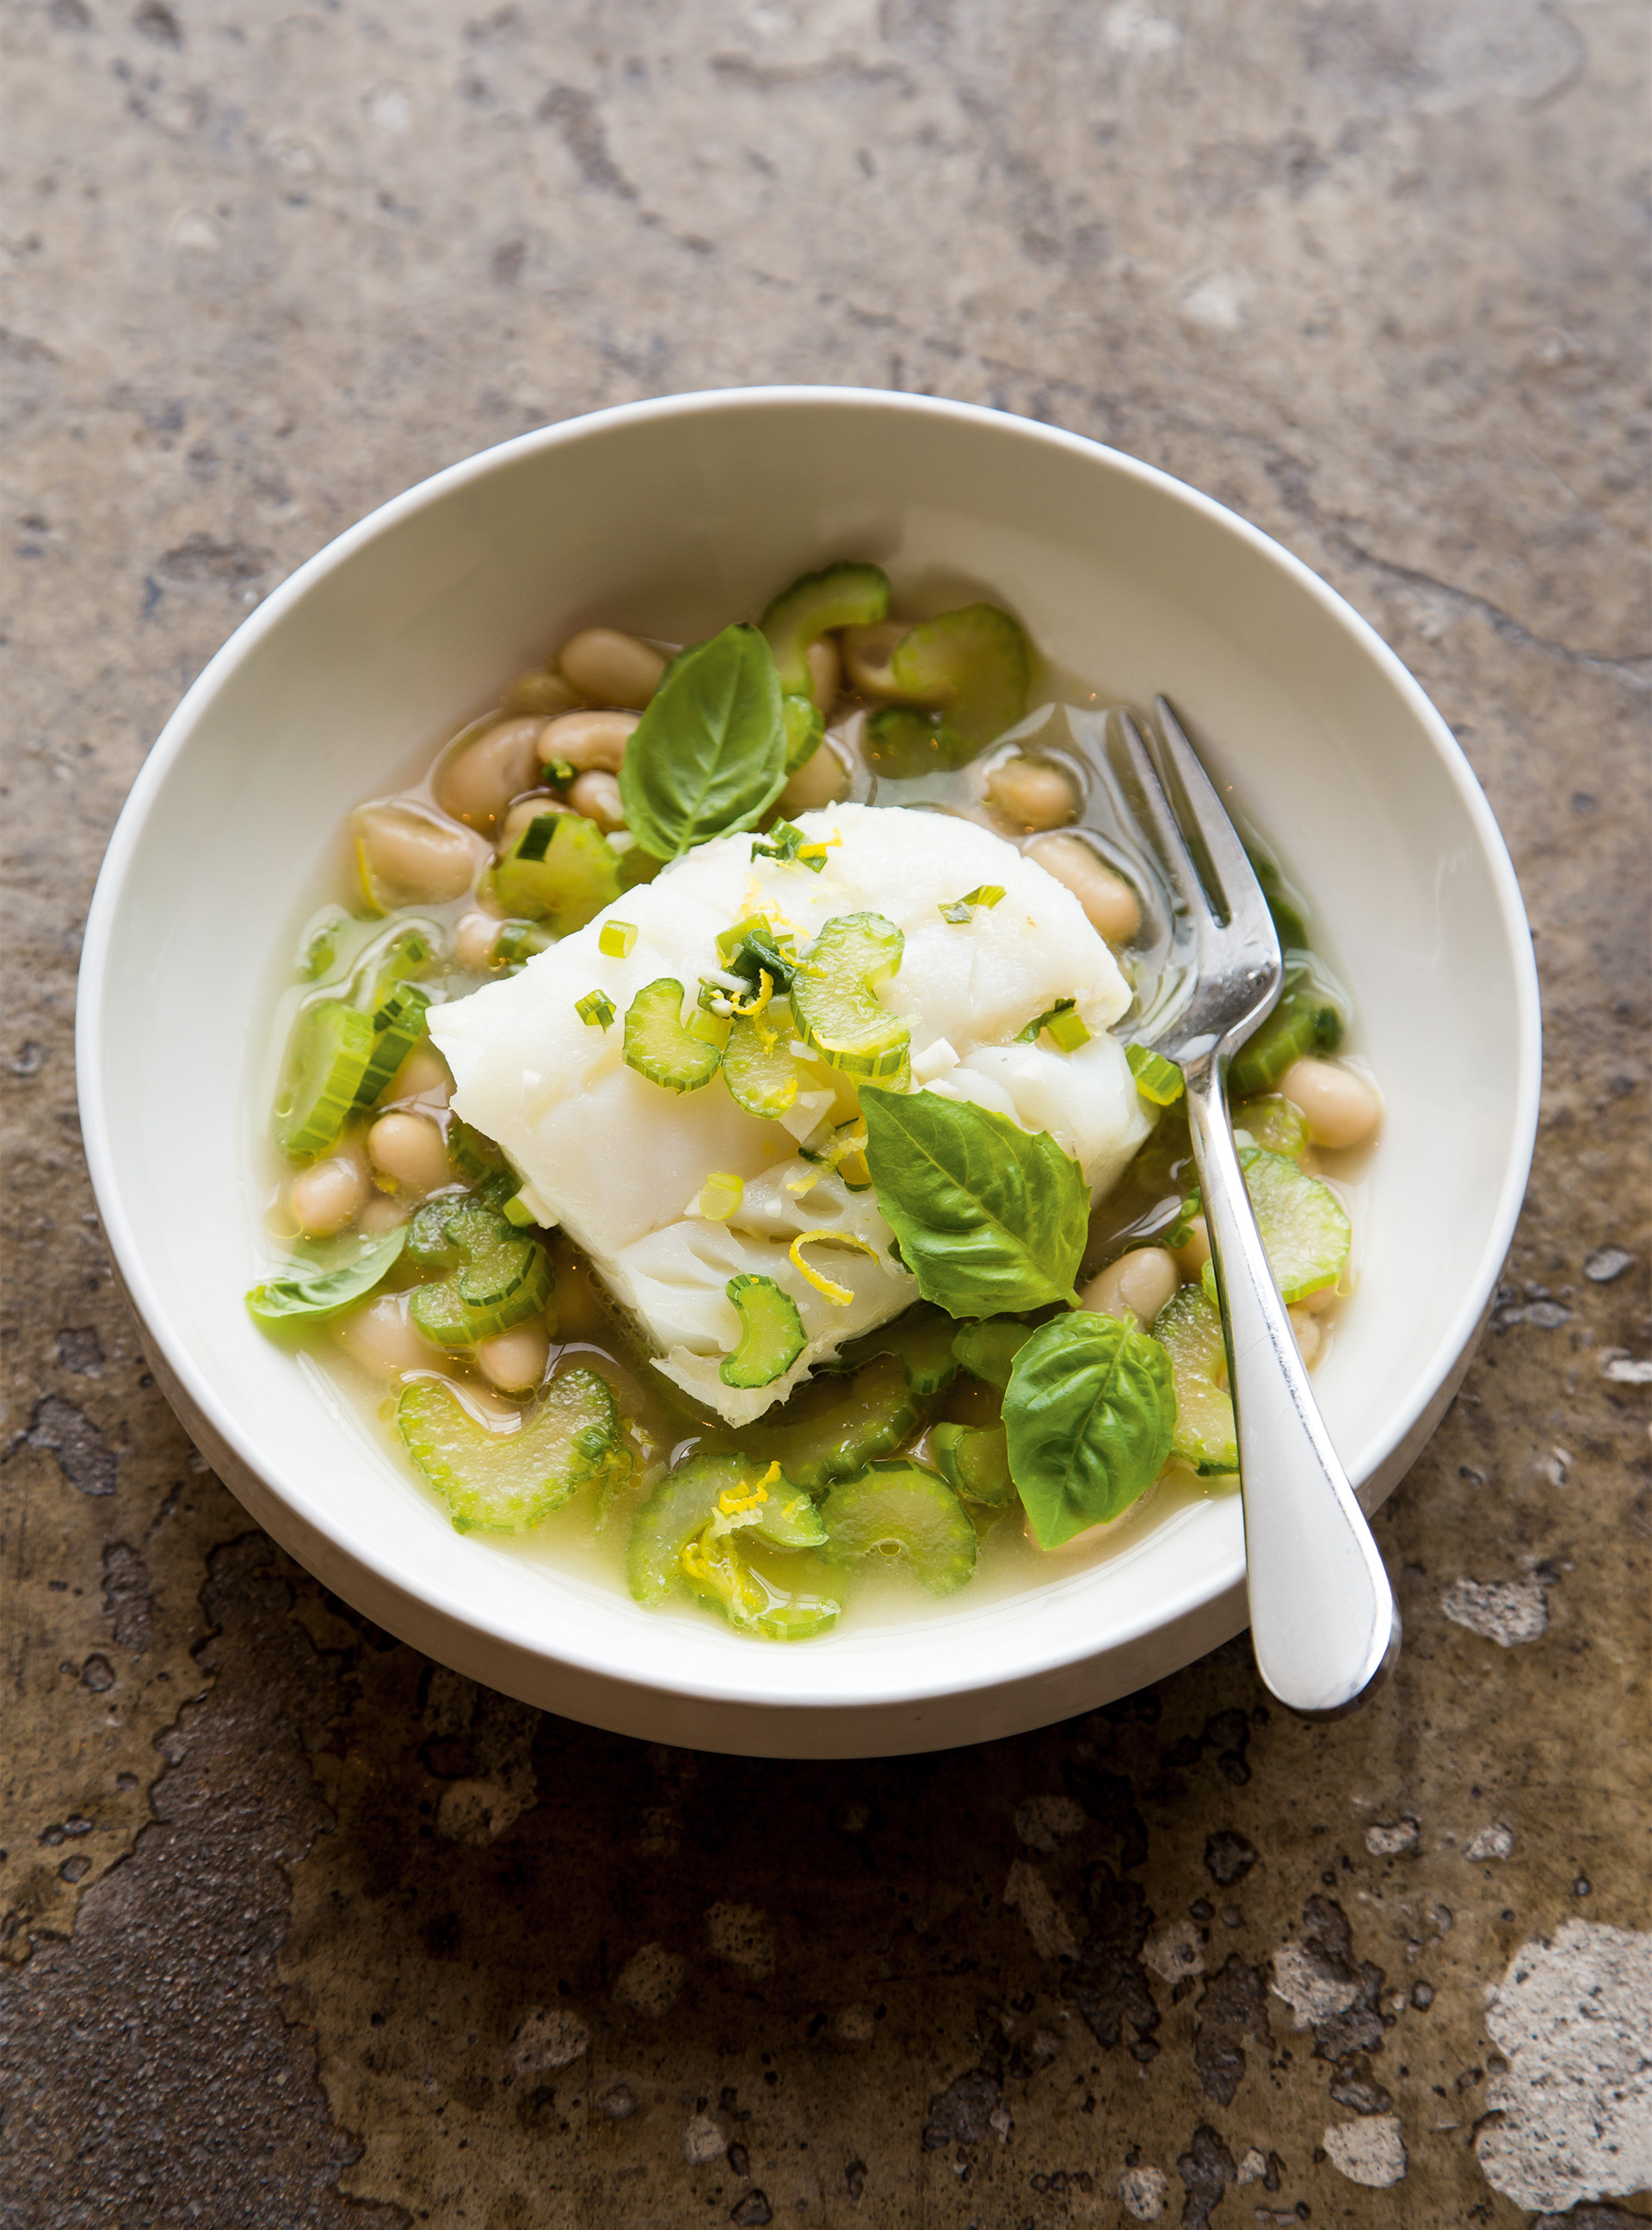 Fish with Braised Celery and White Beans